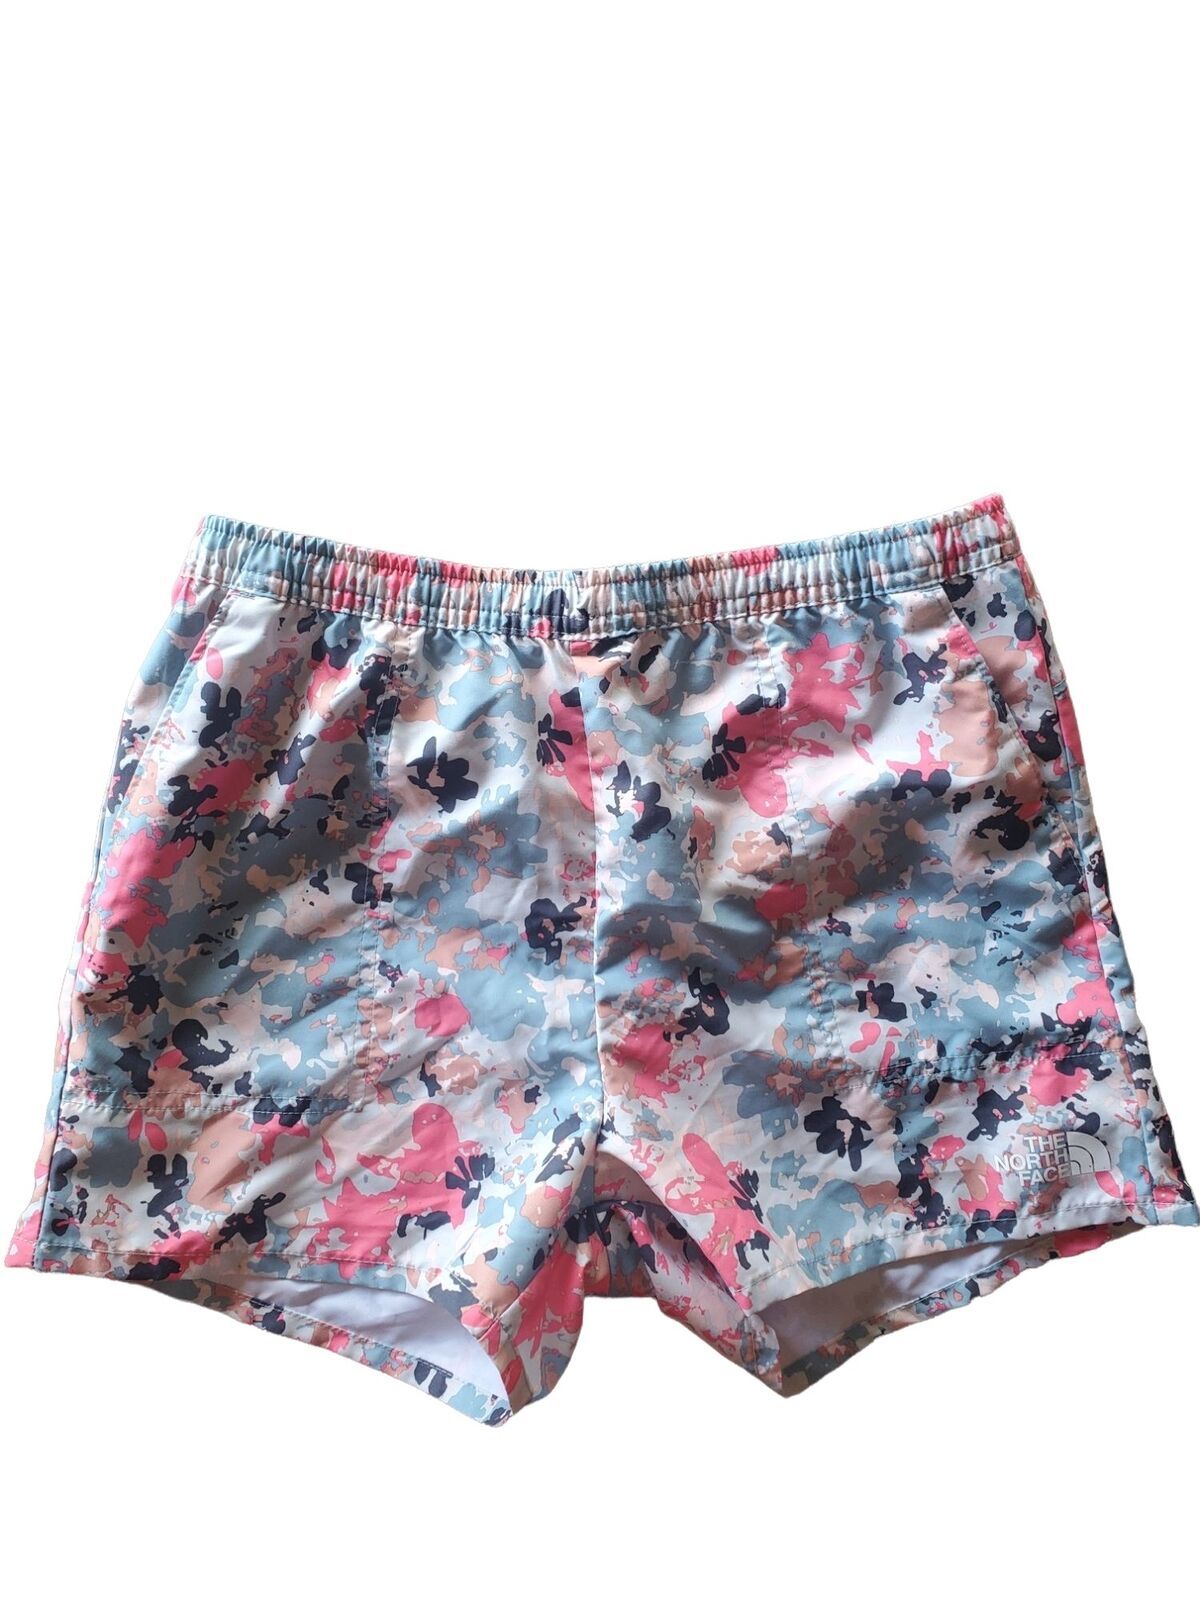 The North Face Shorts 14/16 Girls Large Multicolor Pockets Casual Summer Bottoms - $18.80